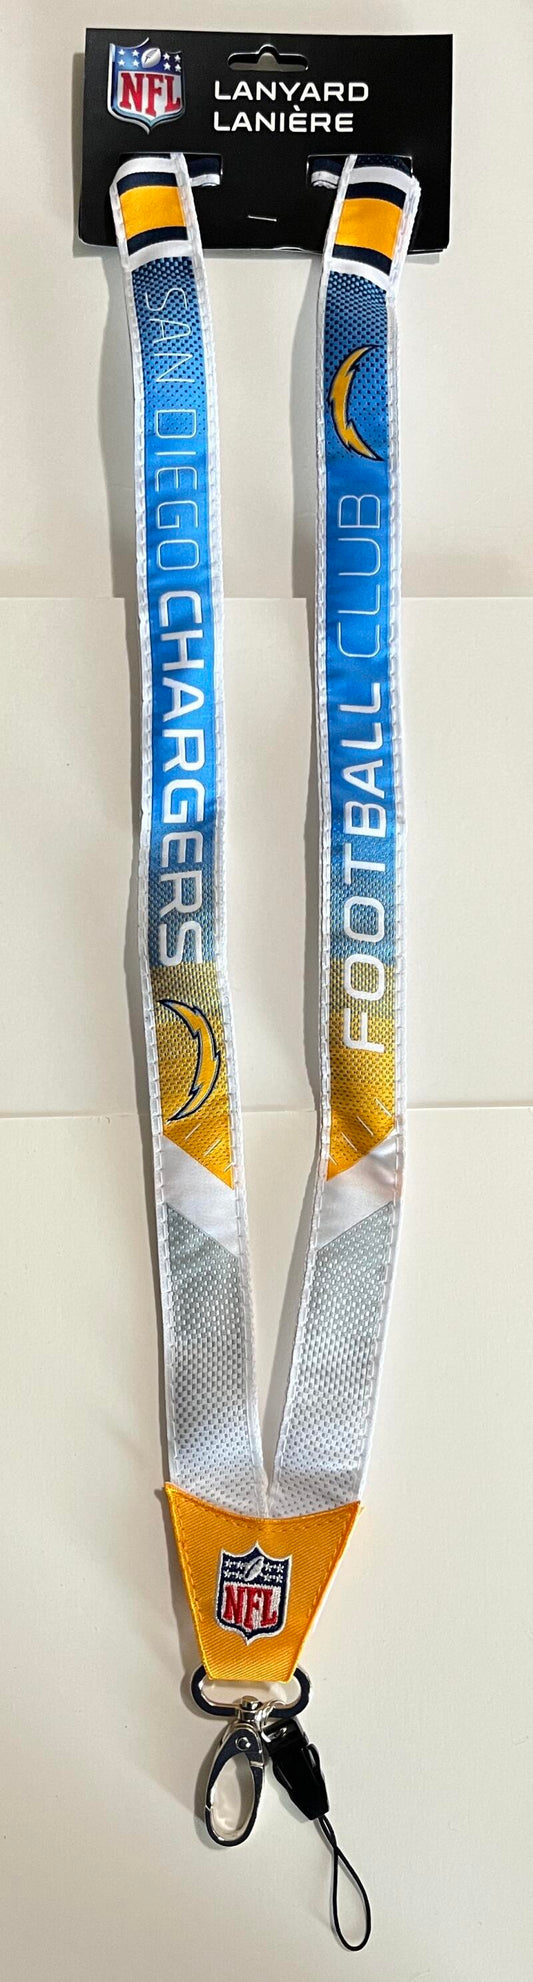 San Diego Chargers Woven Licensed NFL Football Lanyard Metal Clasp Image 1